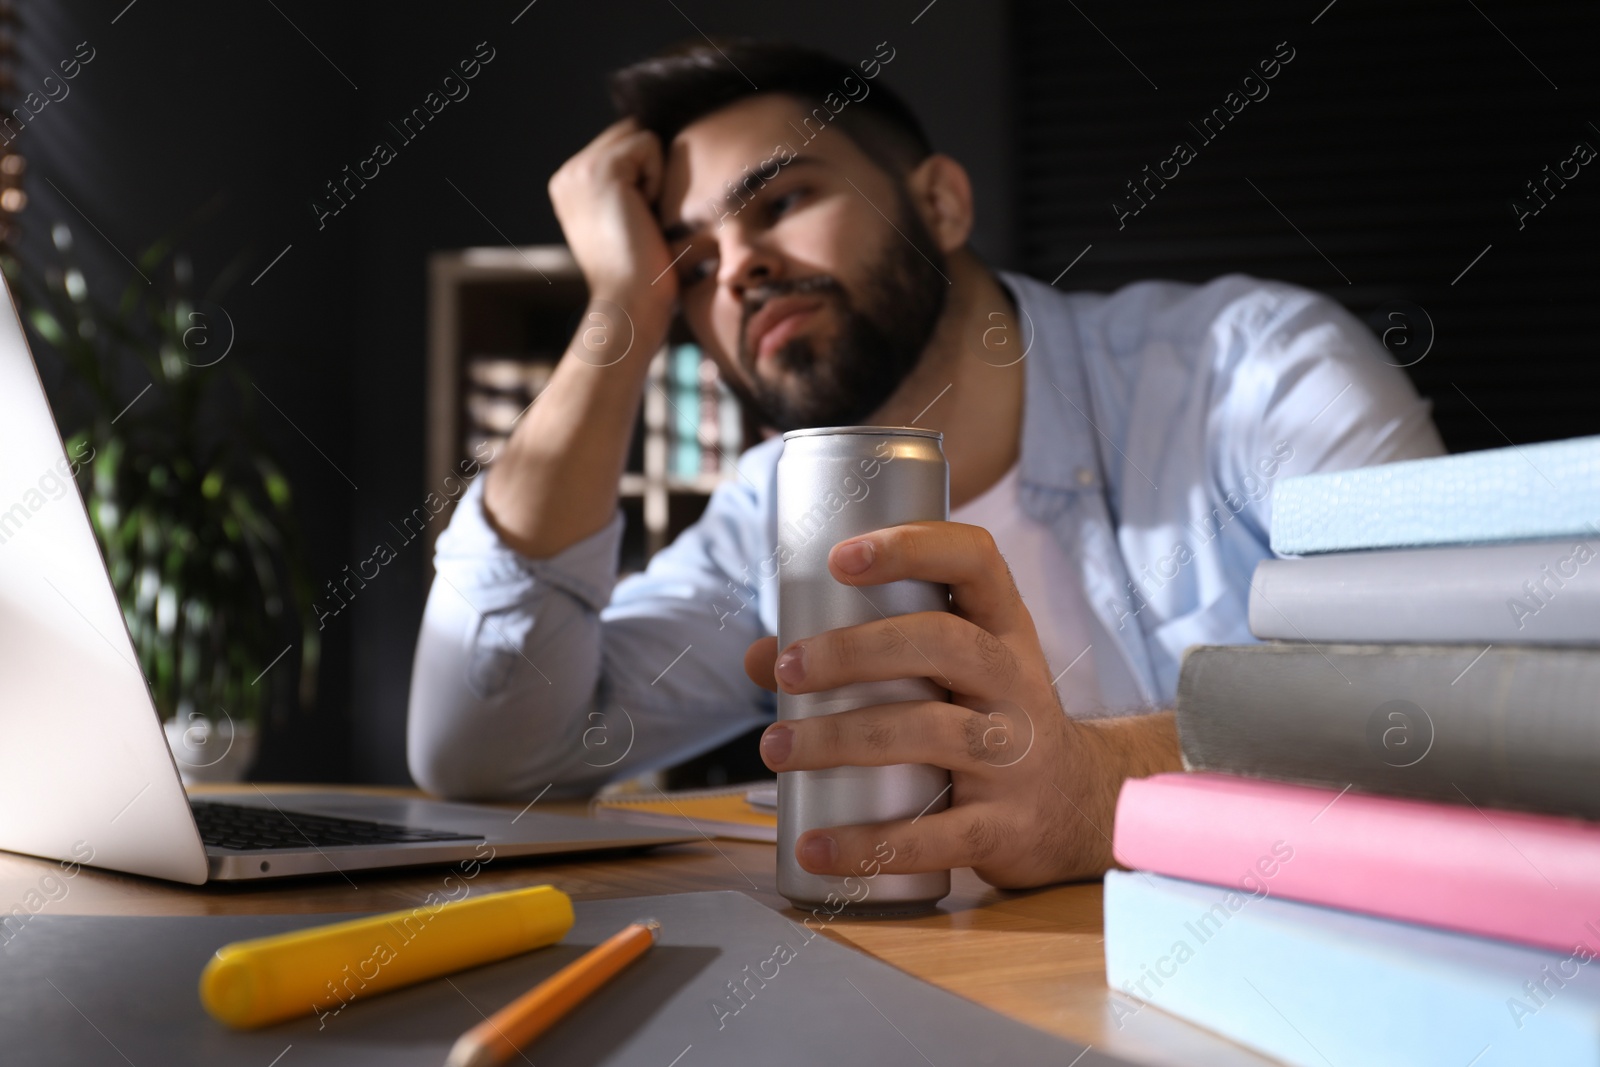 Photo of Tired young man with energy drink studying at home, focus on hand